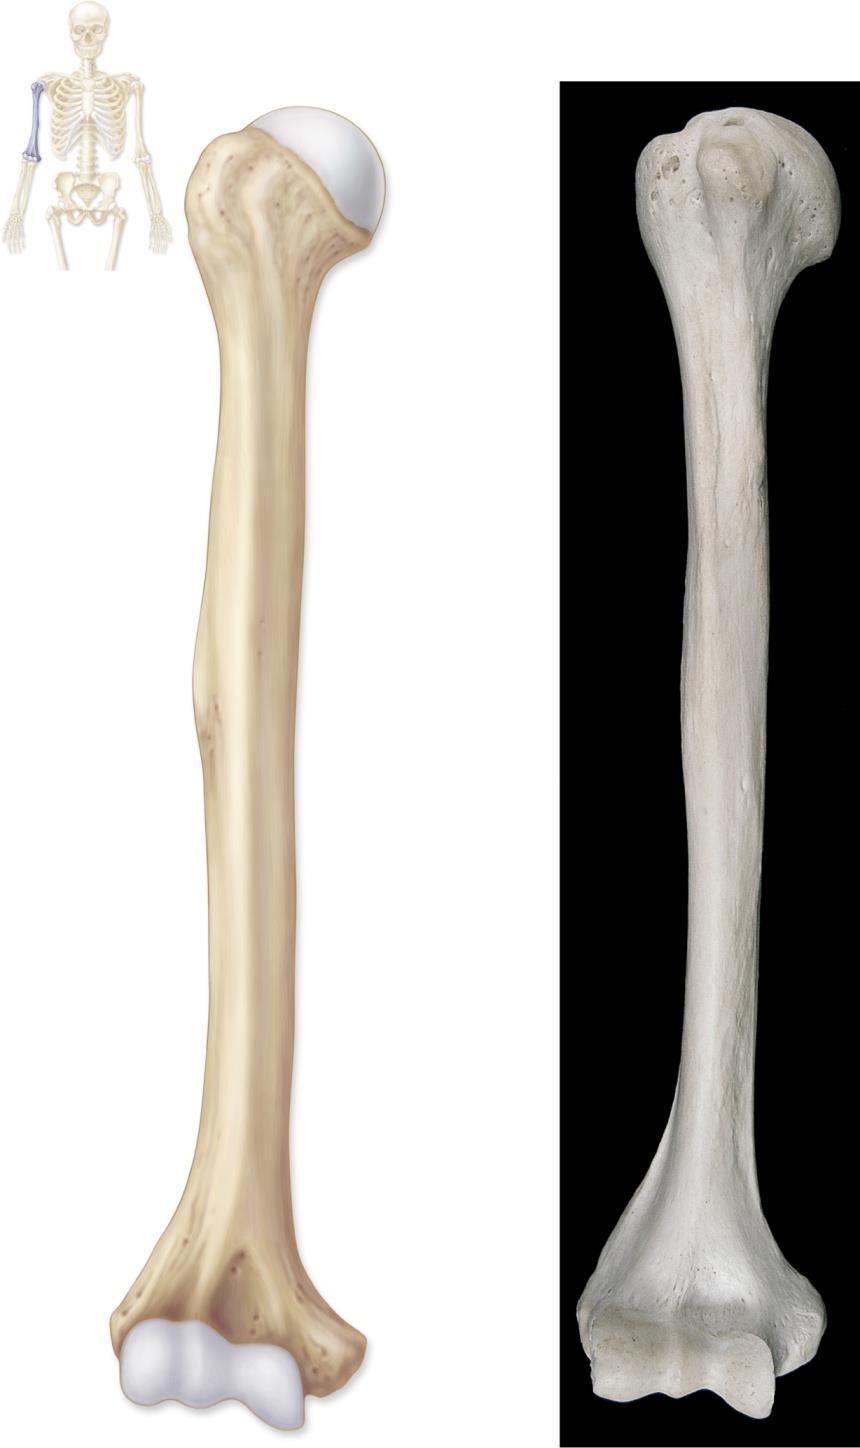 Humerus Copyright The McGraw-Hill Companies, Inc. Permission required for reproduction or display.